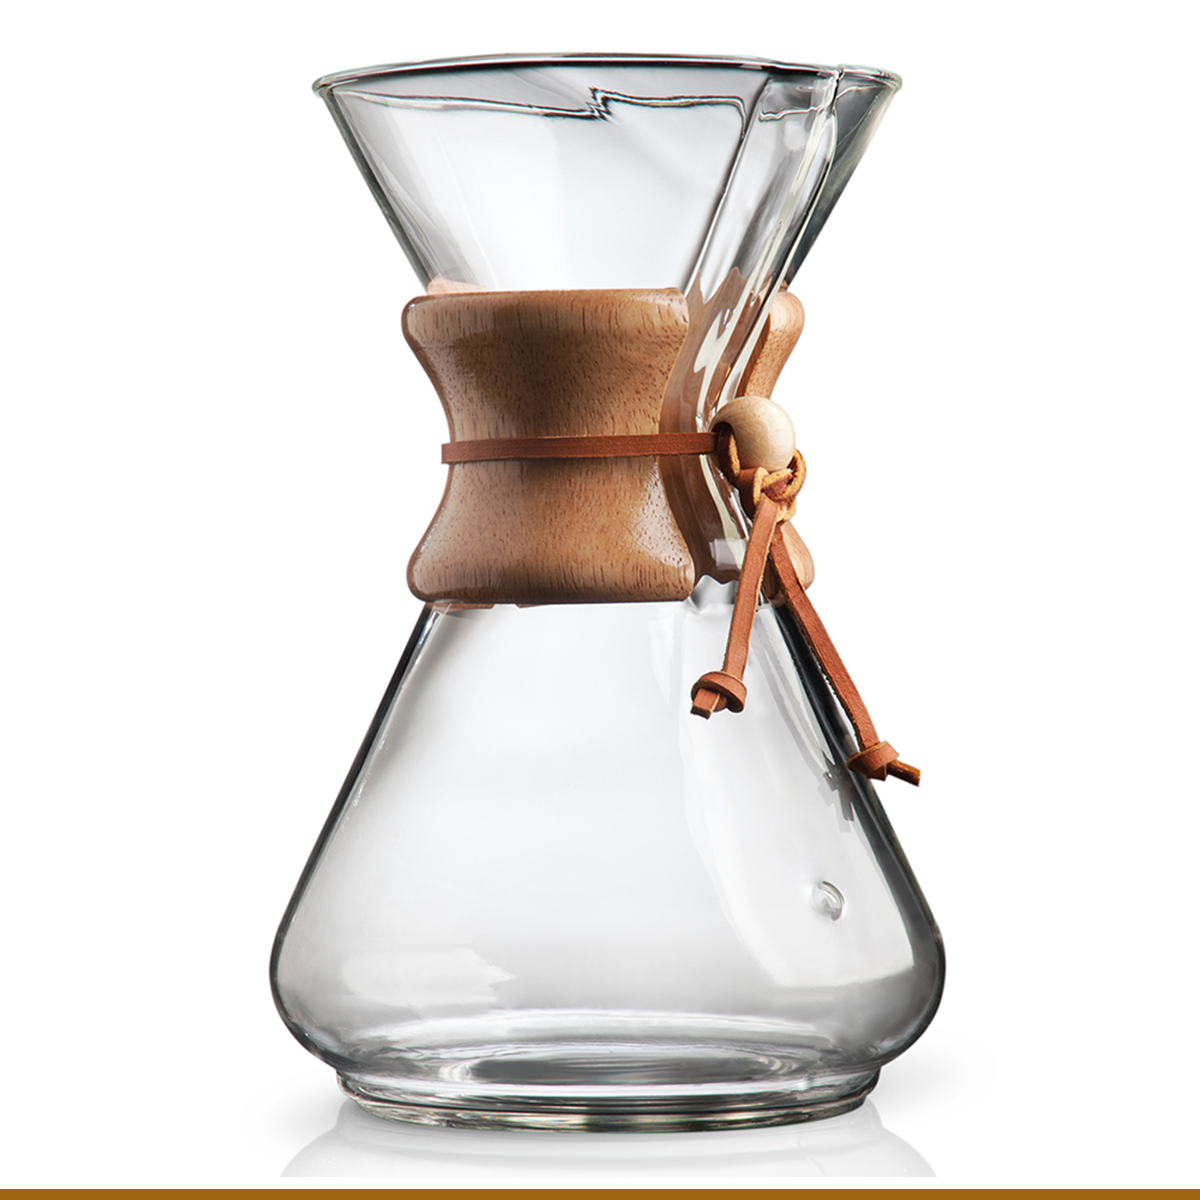 https://store.chemexcoffeemaker.com/media/catalog/product/c/h/chemex-classic-10cup-detail_2.png